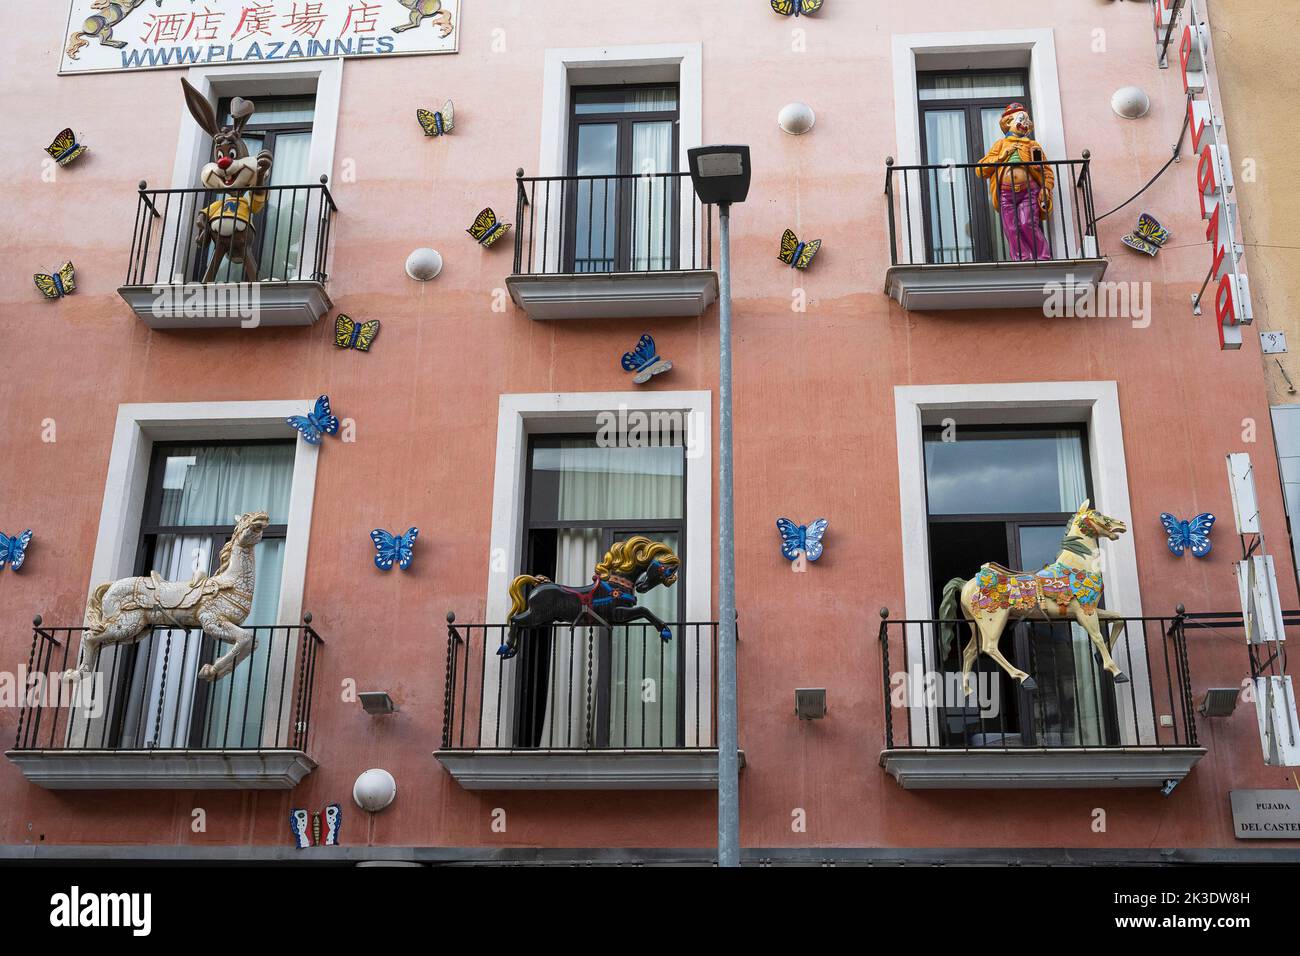 Spain, Figueras: facade of the Plaza Hotel with horses and characters in front of the windows, on balconies Stock Photo